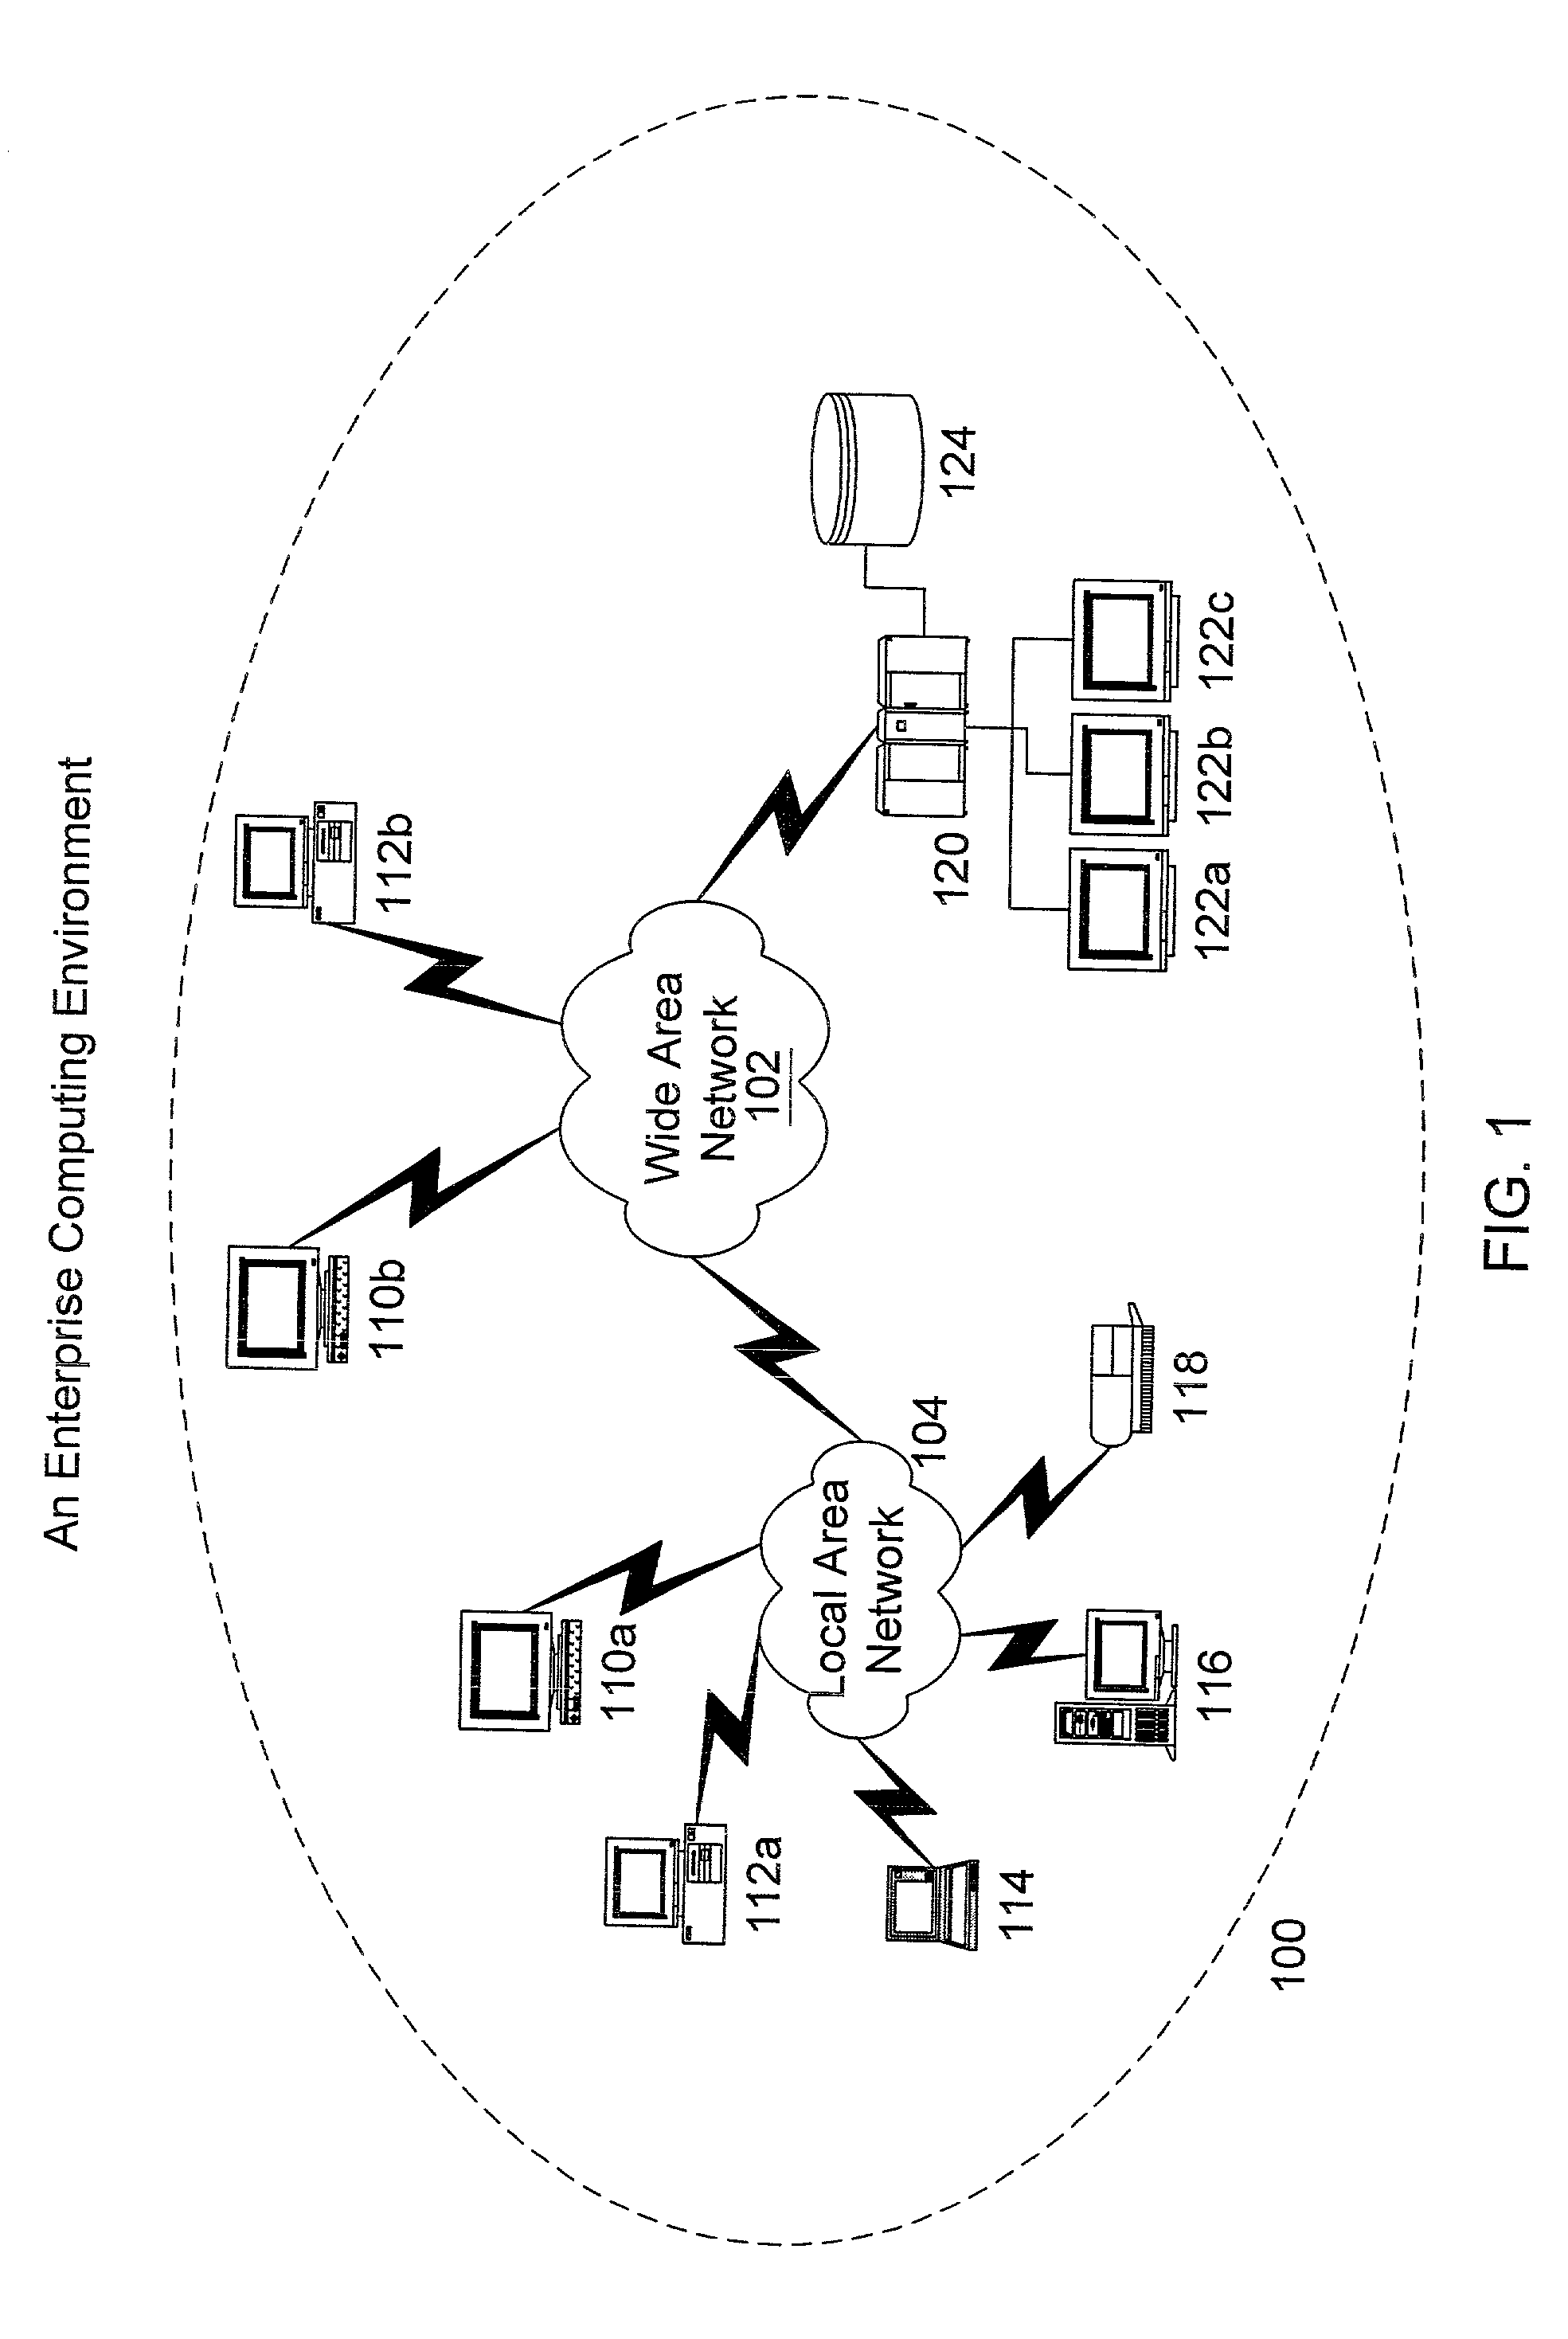 System and method for automatic workload characterization